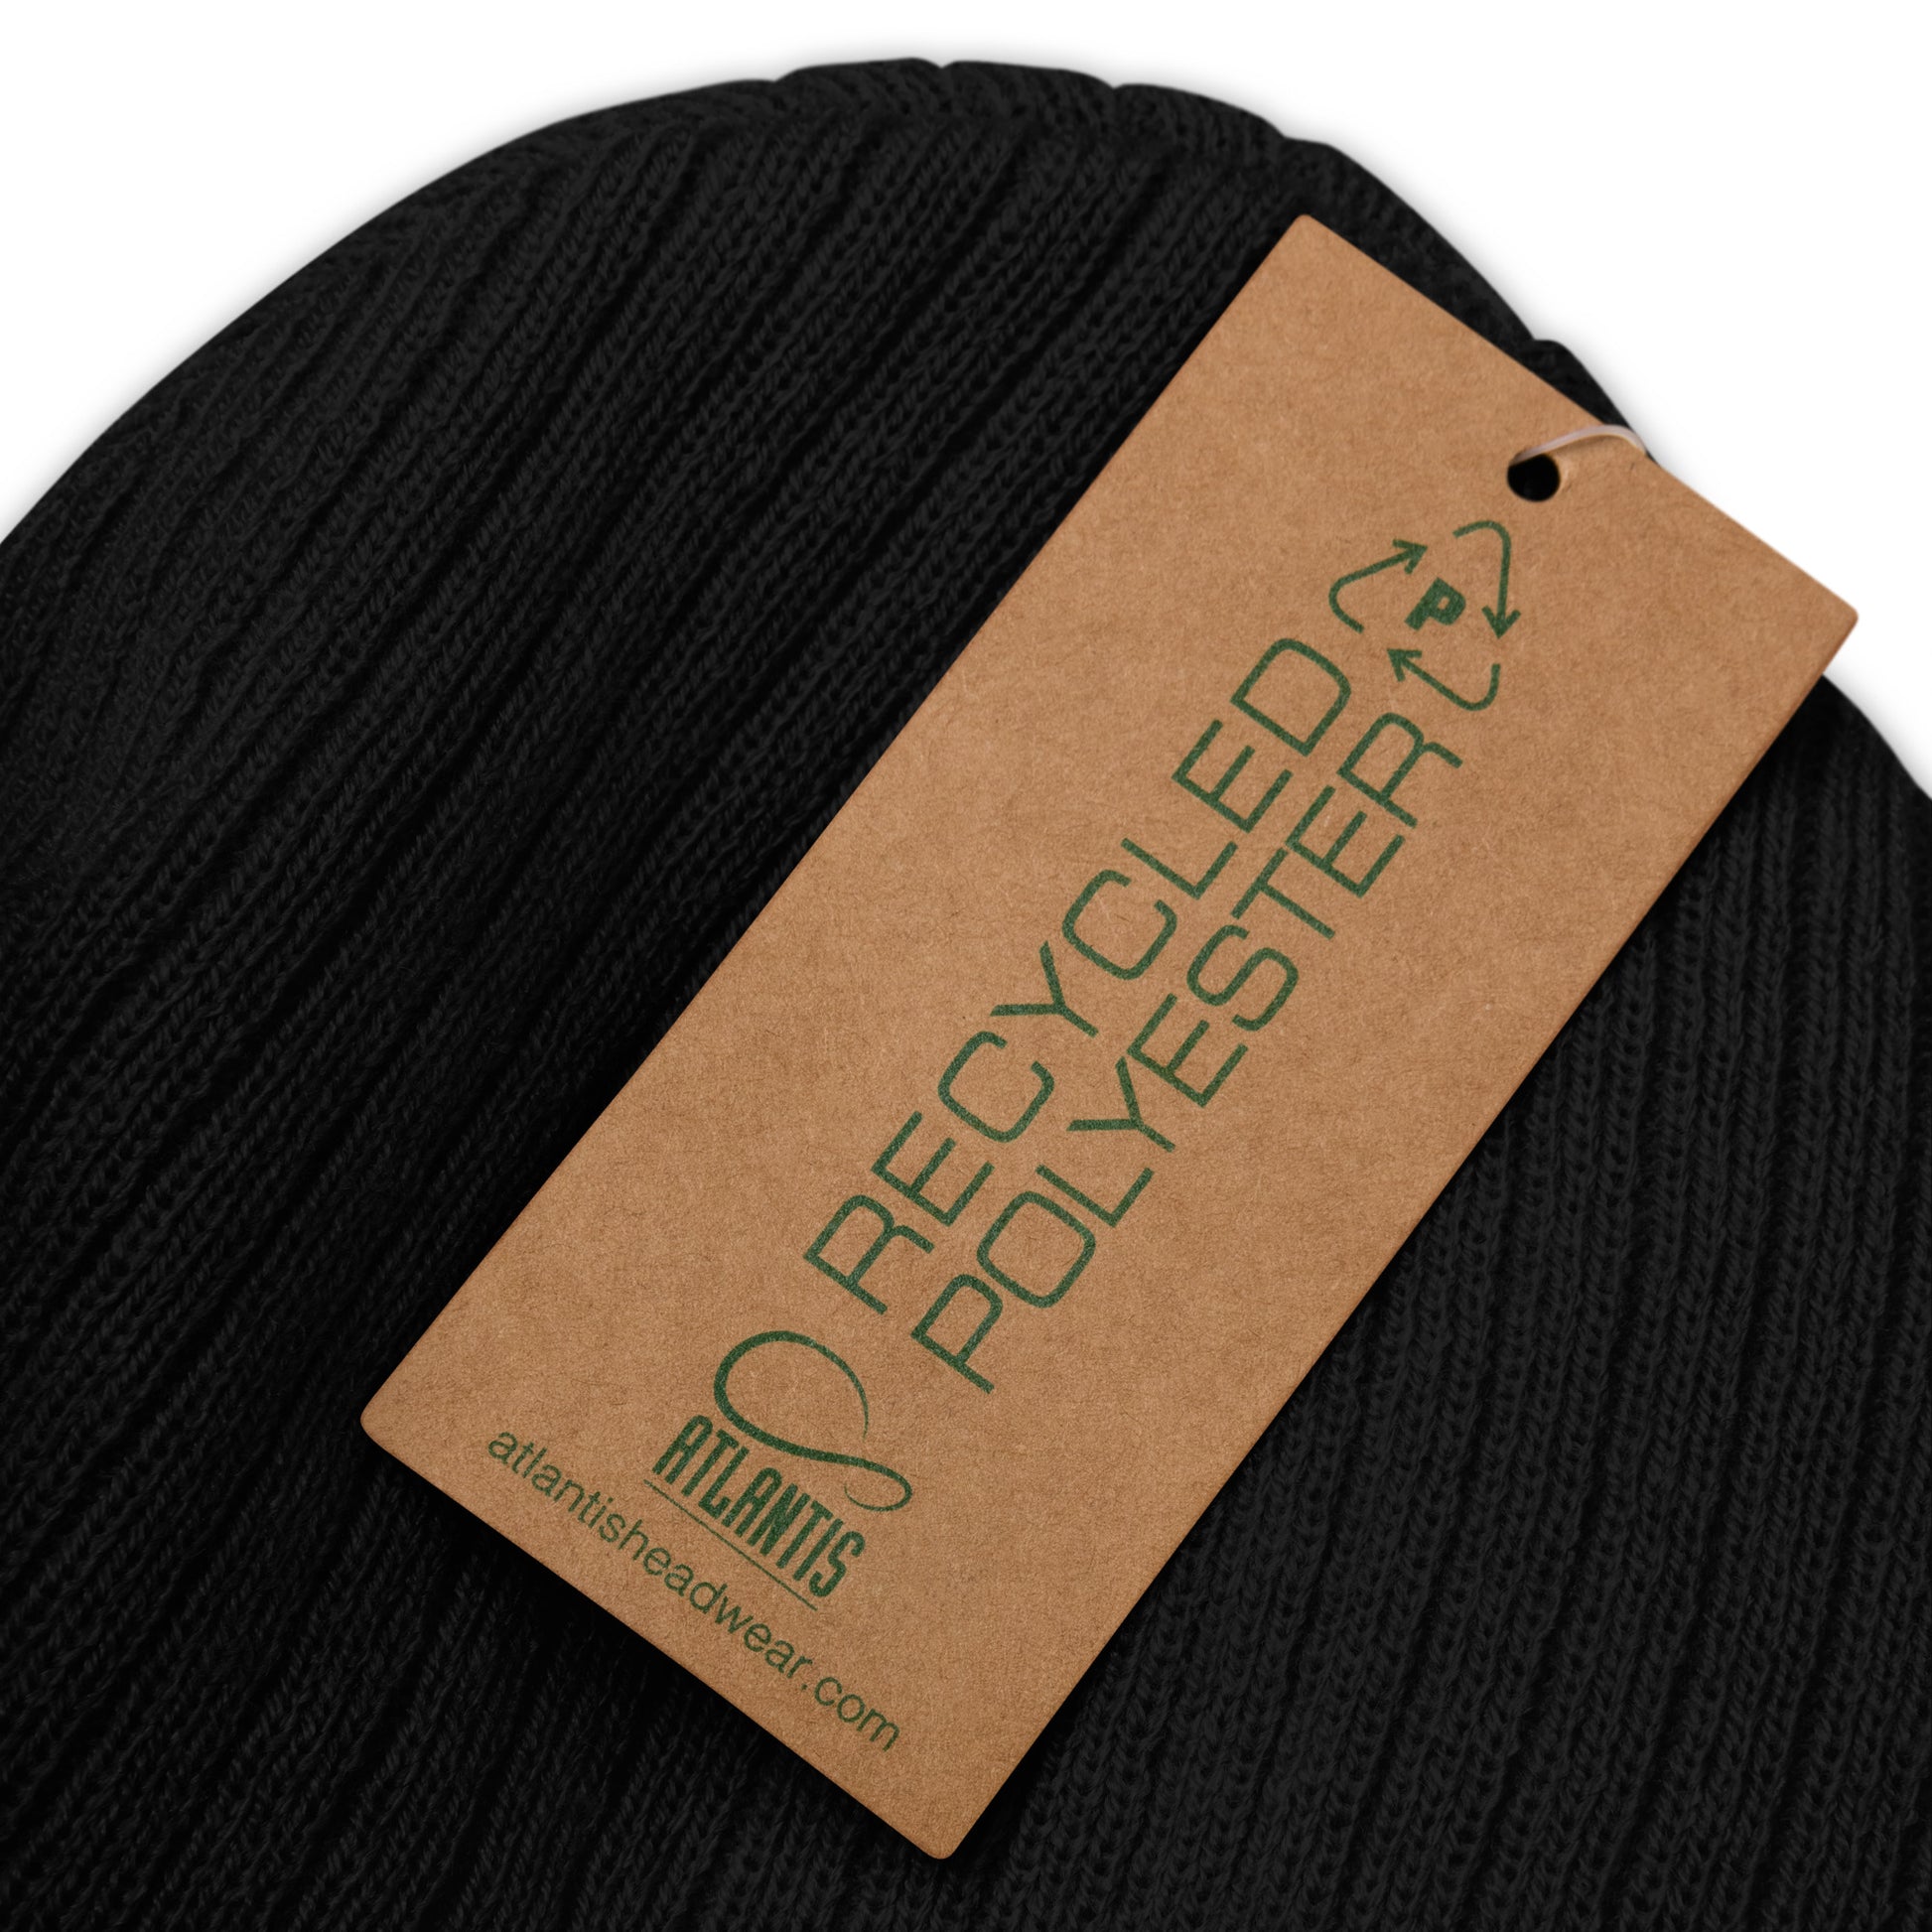  Ribbed Knit Beanie - Recycled polyester - Black  - Close up of Recycled Polyester tag - Go Sea Kayak Byron Bay logo on front - Genuine Byron Bay Merchandise | Produced by Go Sea Kayak Byron Bay 